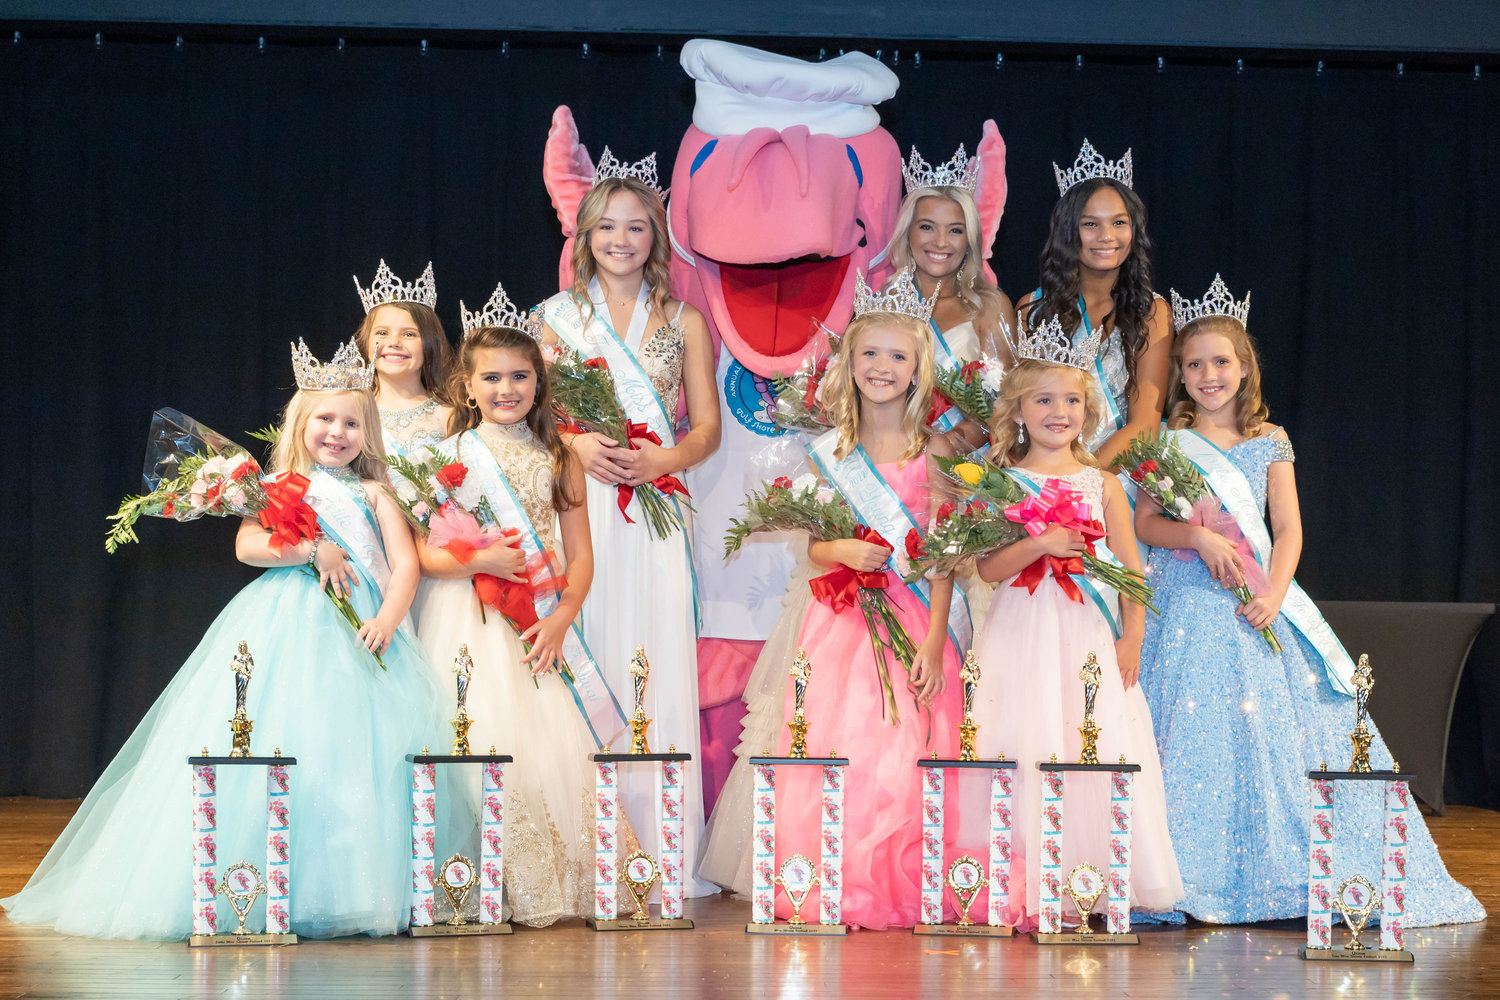 Congratulations to this year's winners: Petite Miss Laura Kate Lee, Little Miss (third grade) Myla Paisley Jones, Petite Miss (second grade) Hilly Katherine Harrell, Teen Miss Sadie Langham, Miss Shrimp Festival Malley Chase Faukner, Junior Miss Khloe Marie Doffee, Young Miss Finley Claire McCay, Tiny Miss Charlotte Louise Peacock, Little Miss Ann-Miller Howe.